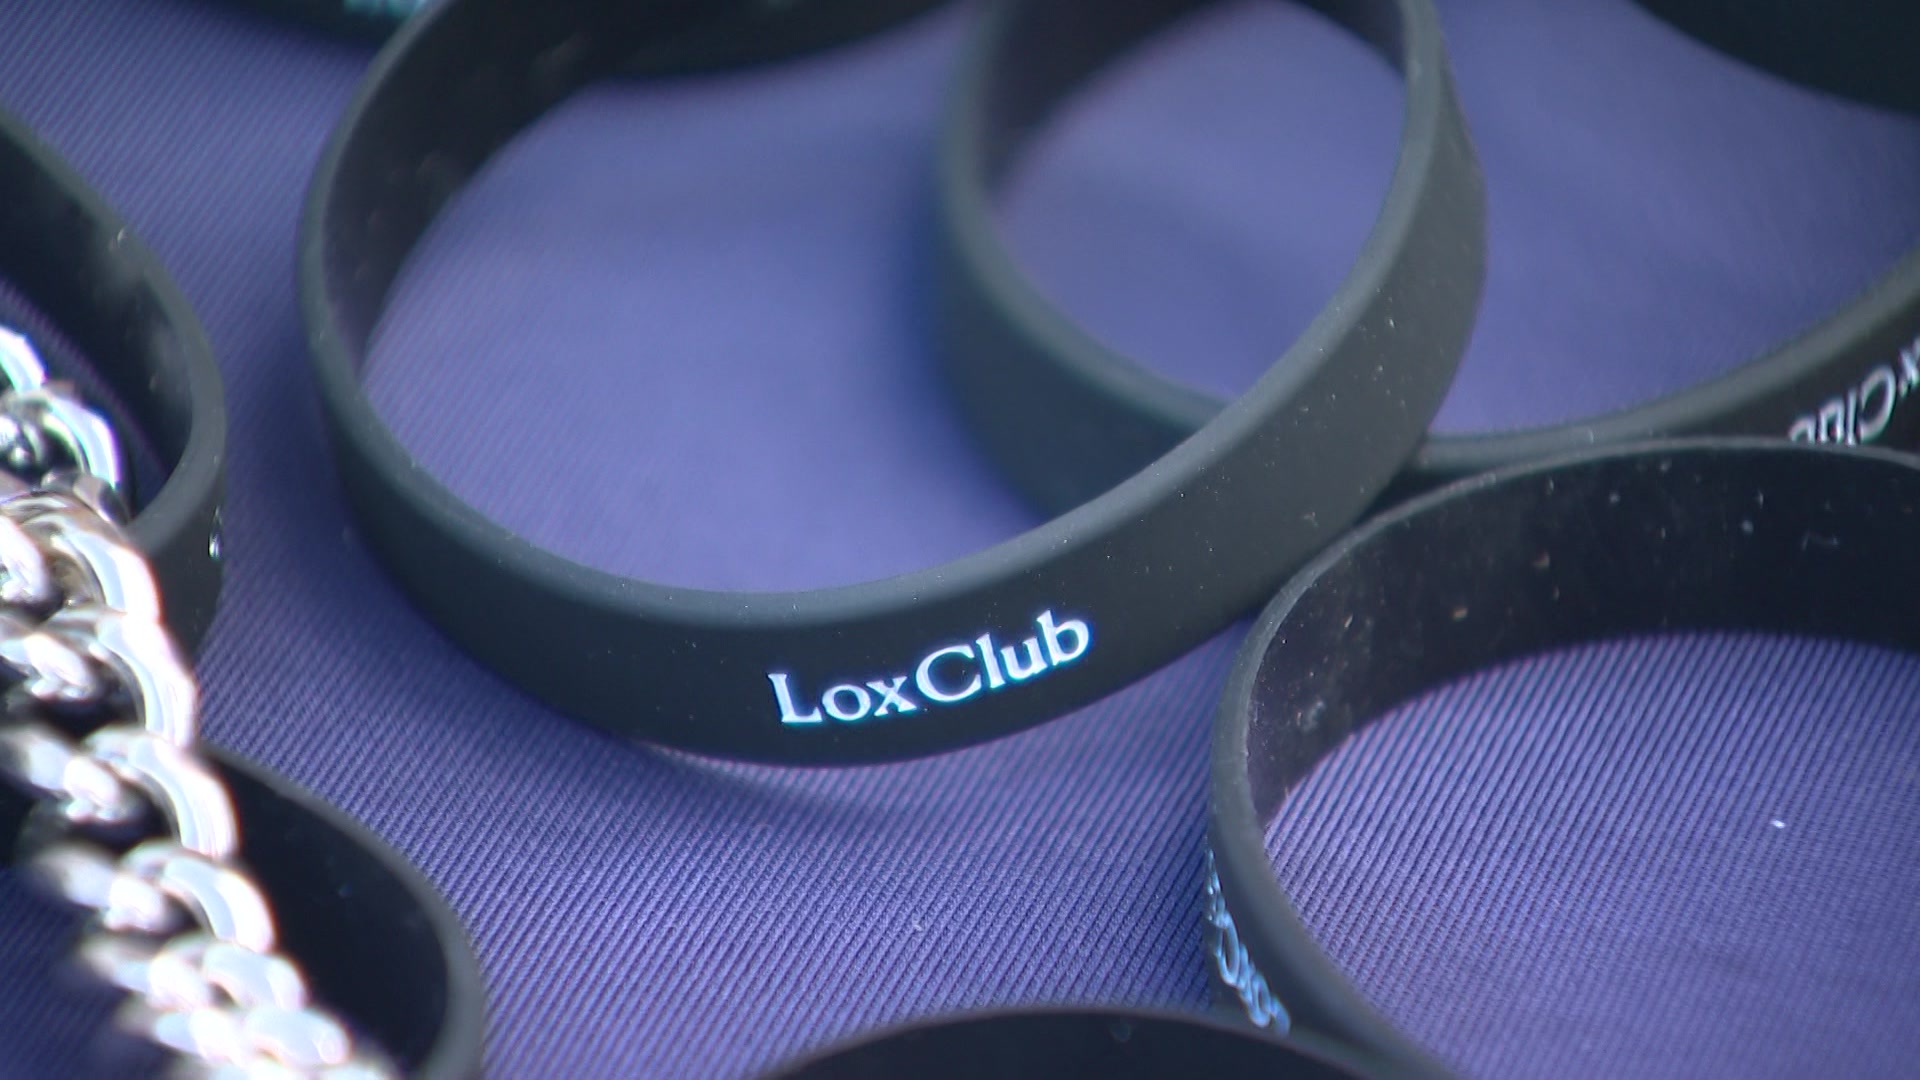 How much does the lox club cost?